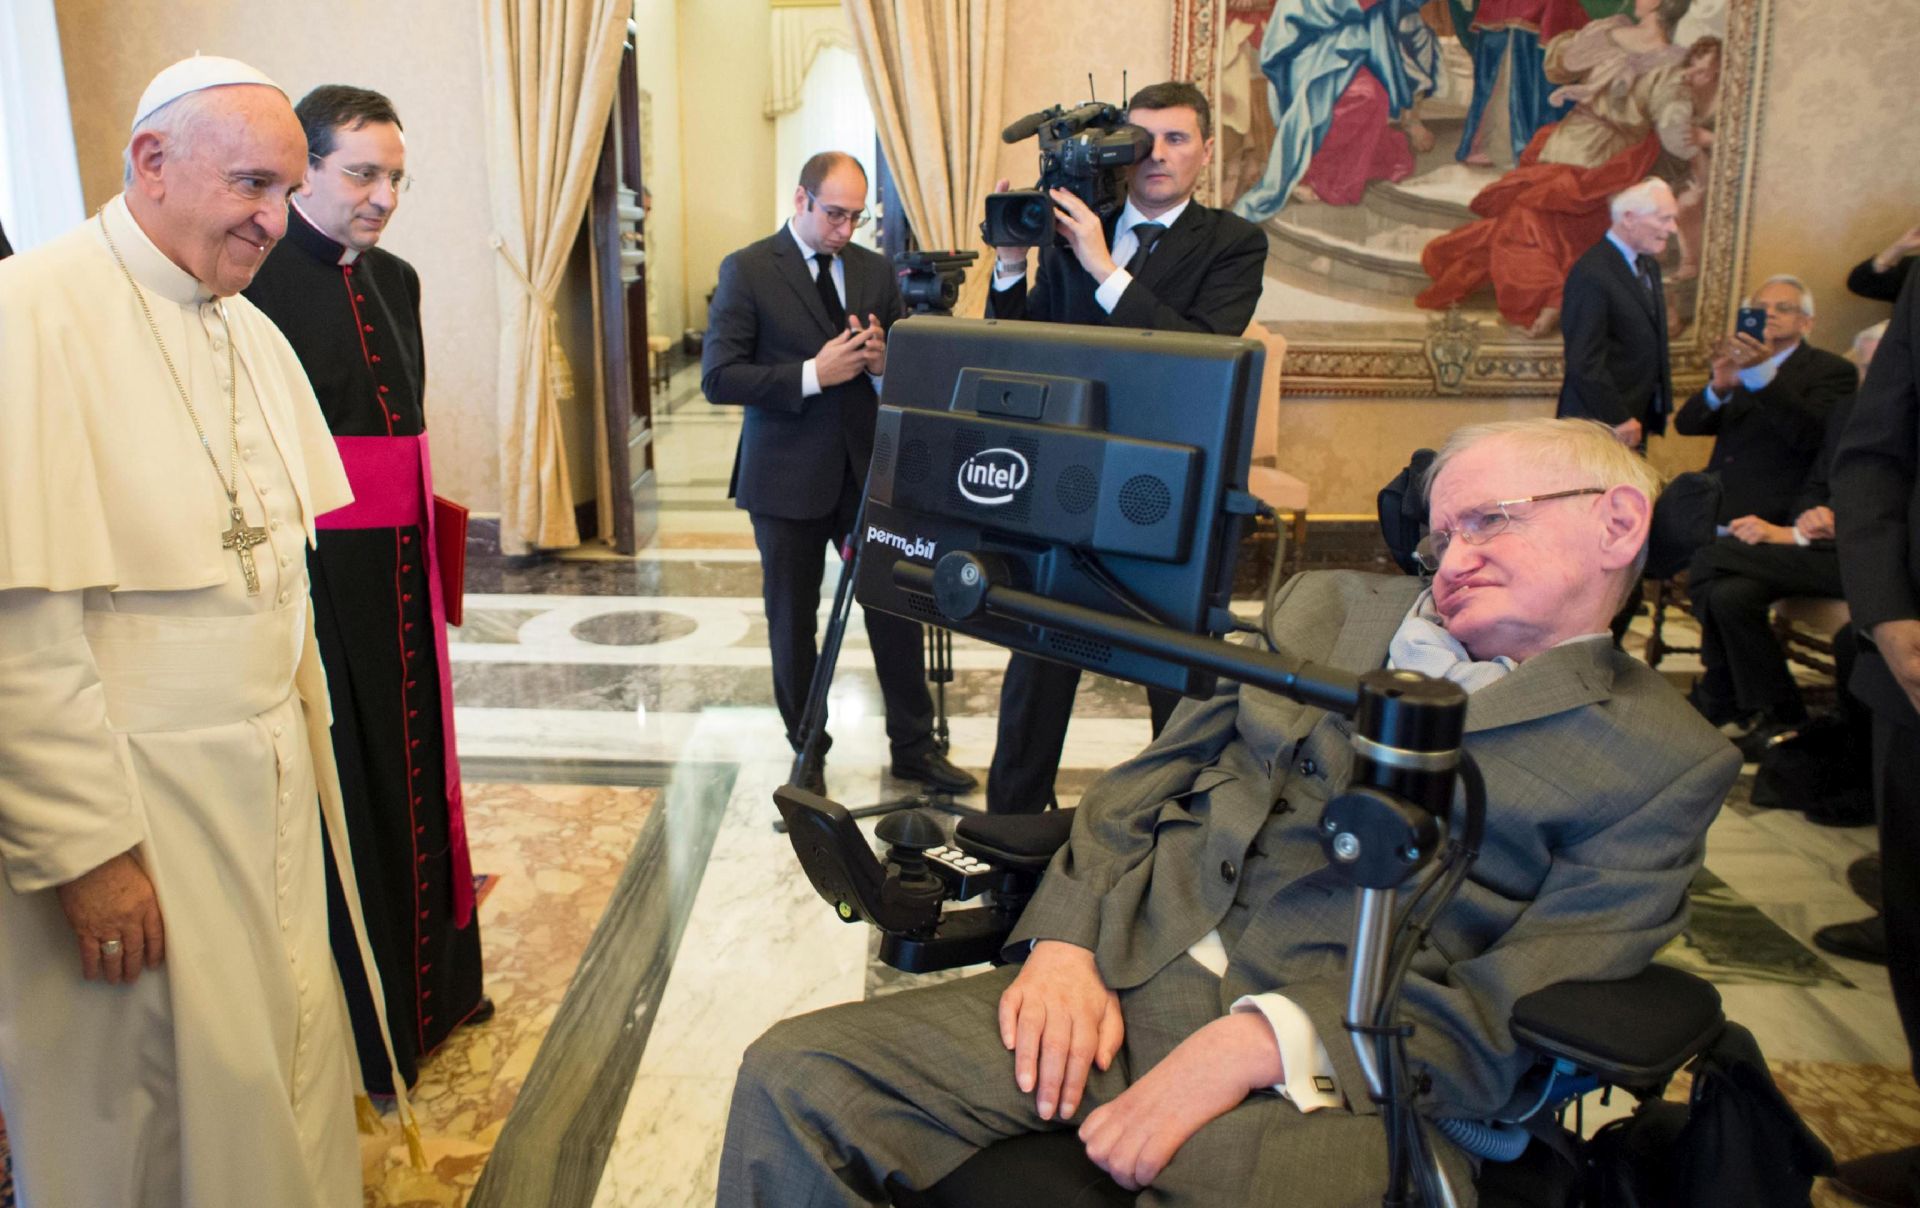 epa05651025 A handout picture provided by the Vatican newspaper L'Osservatore Romano showing Pope Francis talking to British Professor Stephen Hawking (R) during the plenary meeting of the Pontifical Academy of Sciences, in Vatican City, 28 November 2016.  EPA/L'OSSERVATORE ROMANO / HANDOUT PHOTO TO BE USED SOLELY TO ILLUSTRATE NEWS REPORTING OR COMMENTARY ON THE FACTS OR EVENTS DEPICTED IN THIS IMAGE; NO ARCHIVING; NO LICENSING HANDOUT EDITORIAL USE ONLY/NO SALES